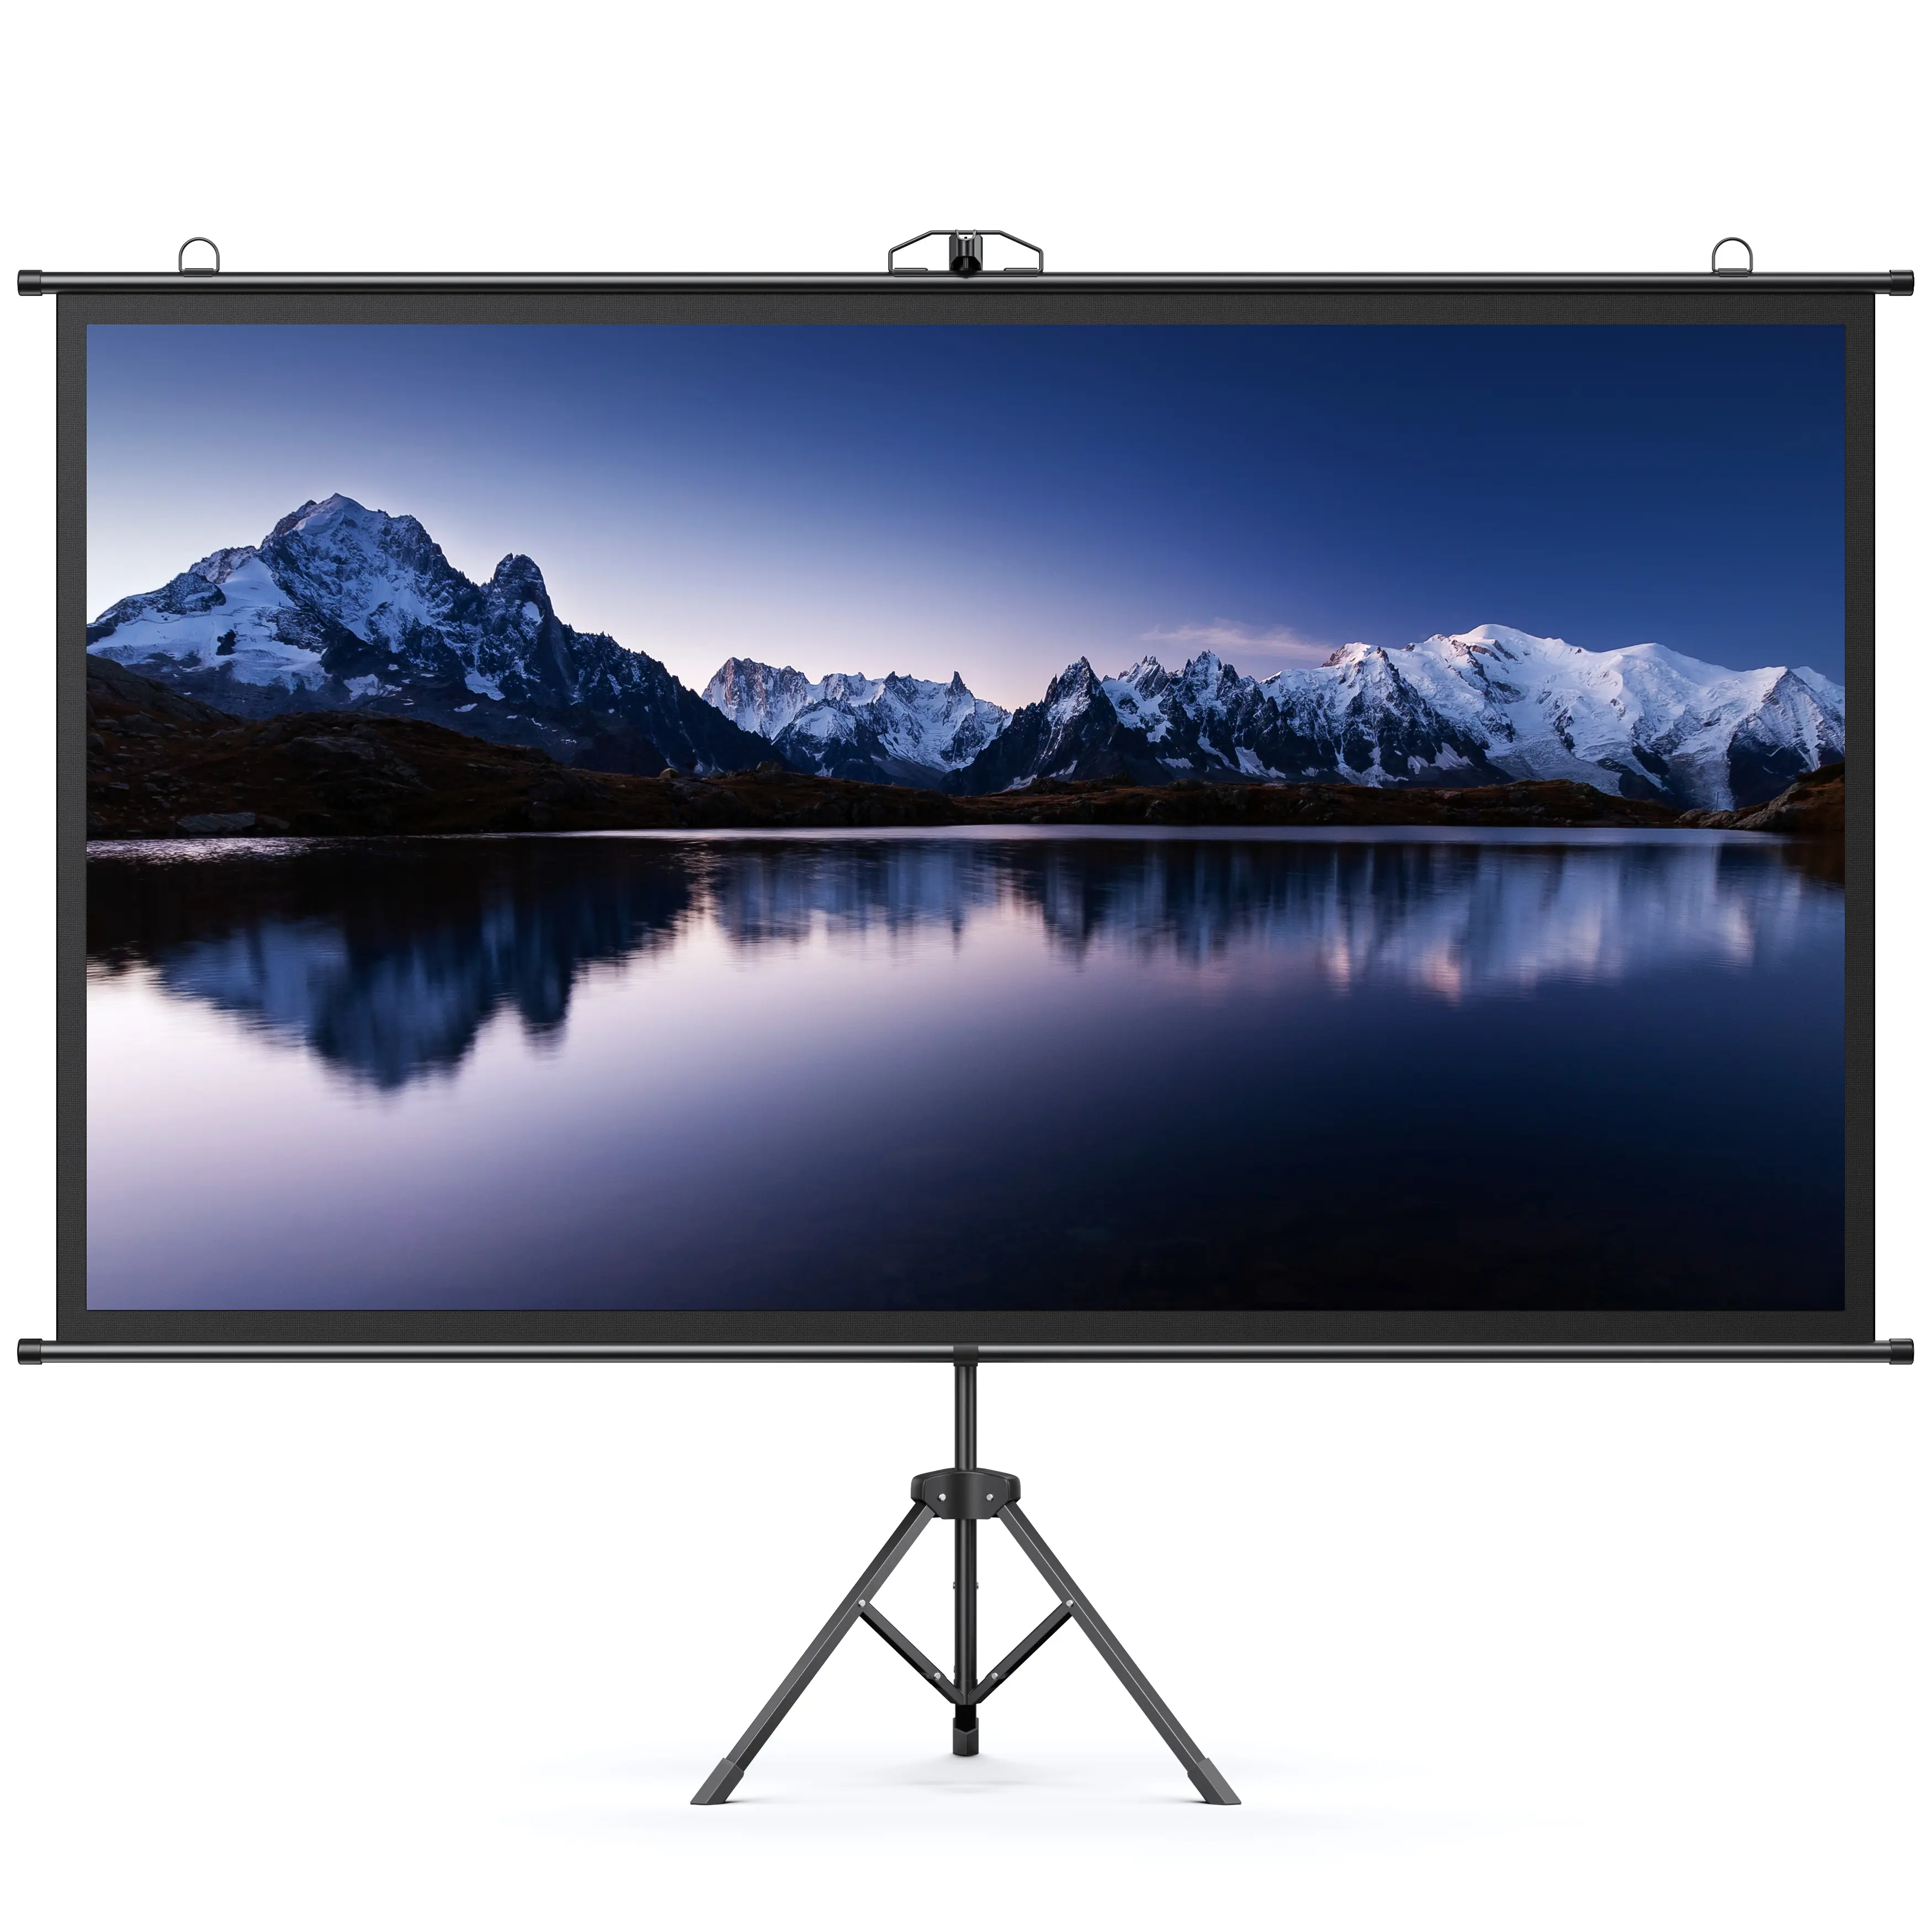 Yaber 84inch 100inch Projector Screen Outdoor Movie Tripod Screen Floor Rising Projector Screen